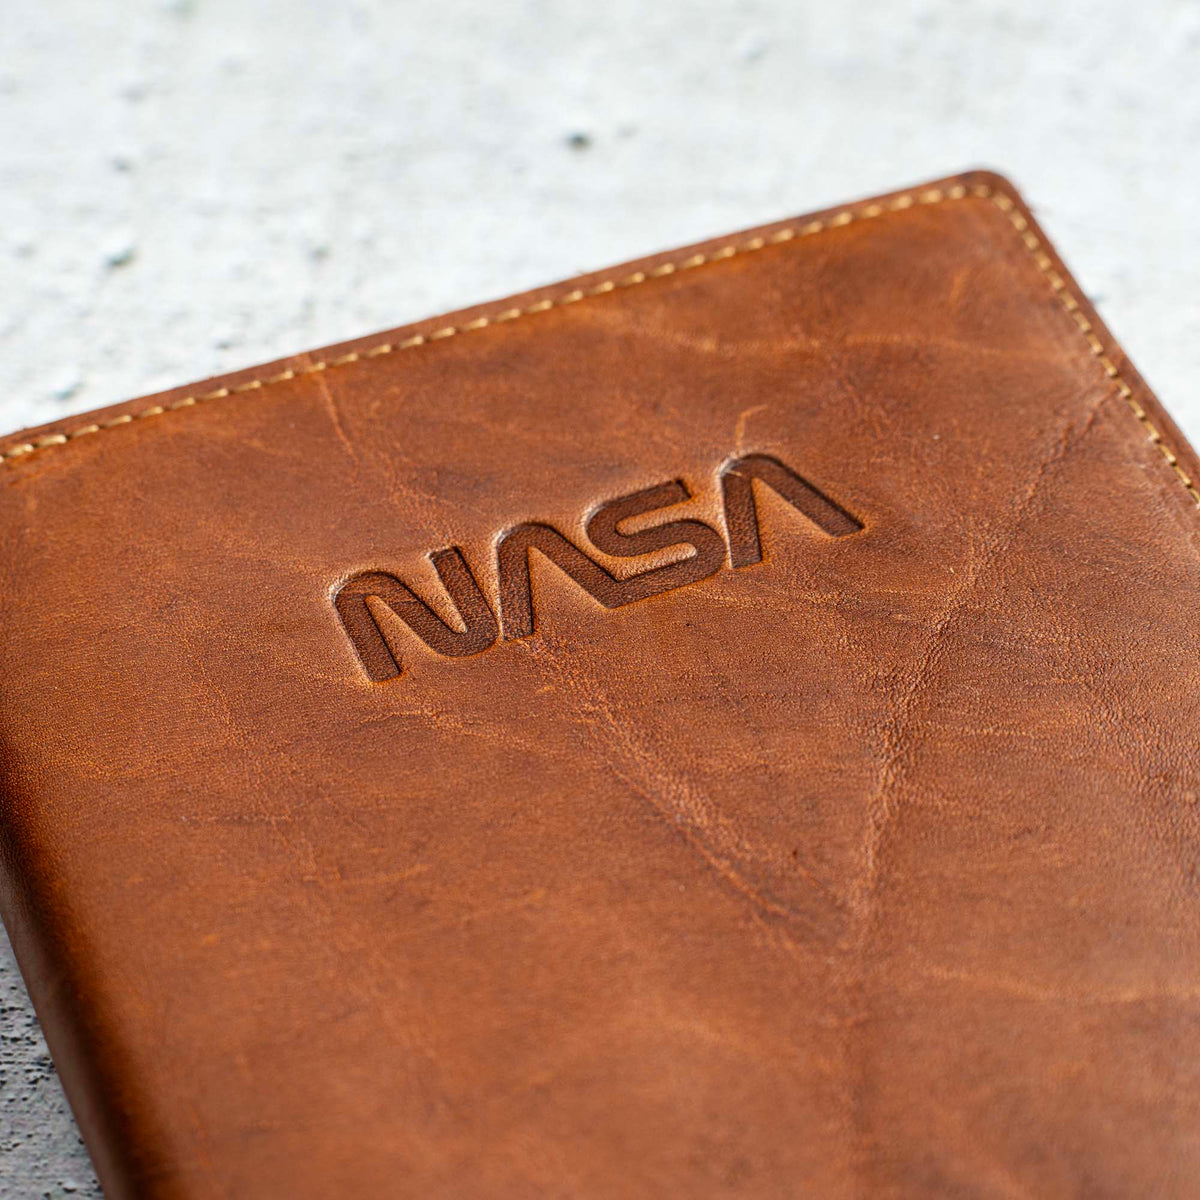 The Nasa Scholar - Personalized Leather Journal Cover